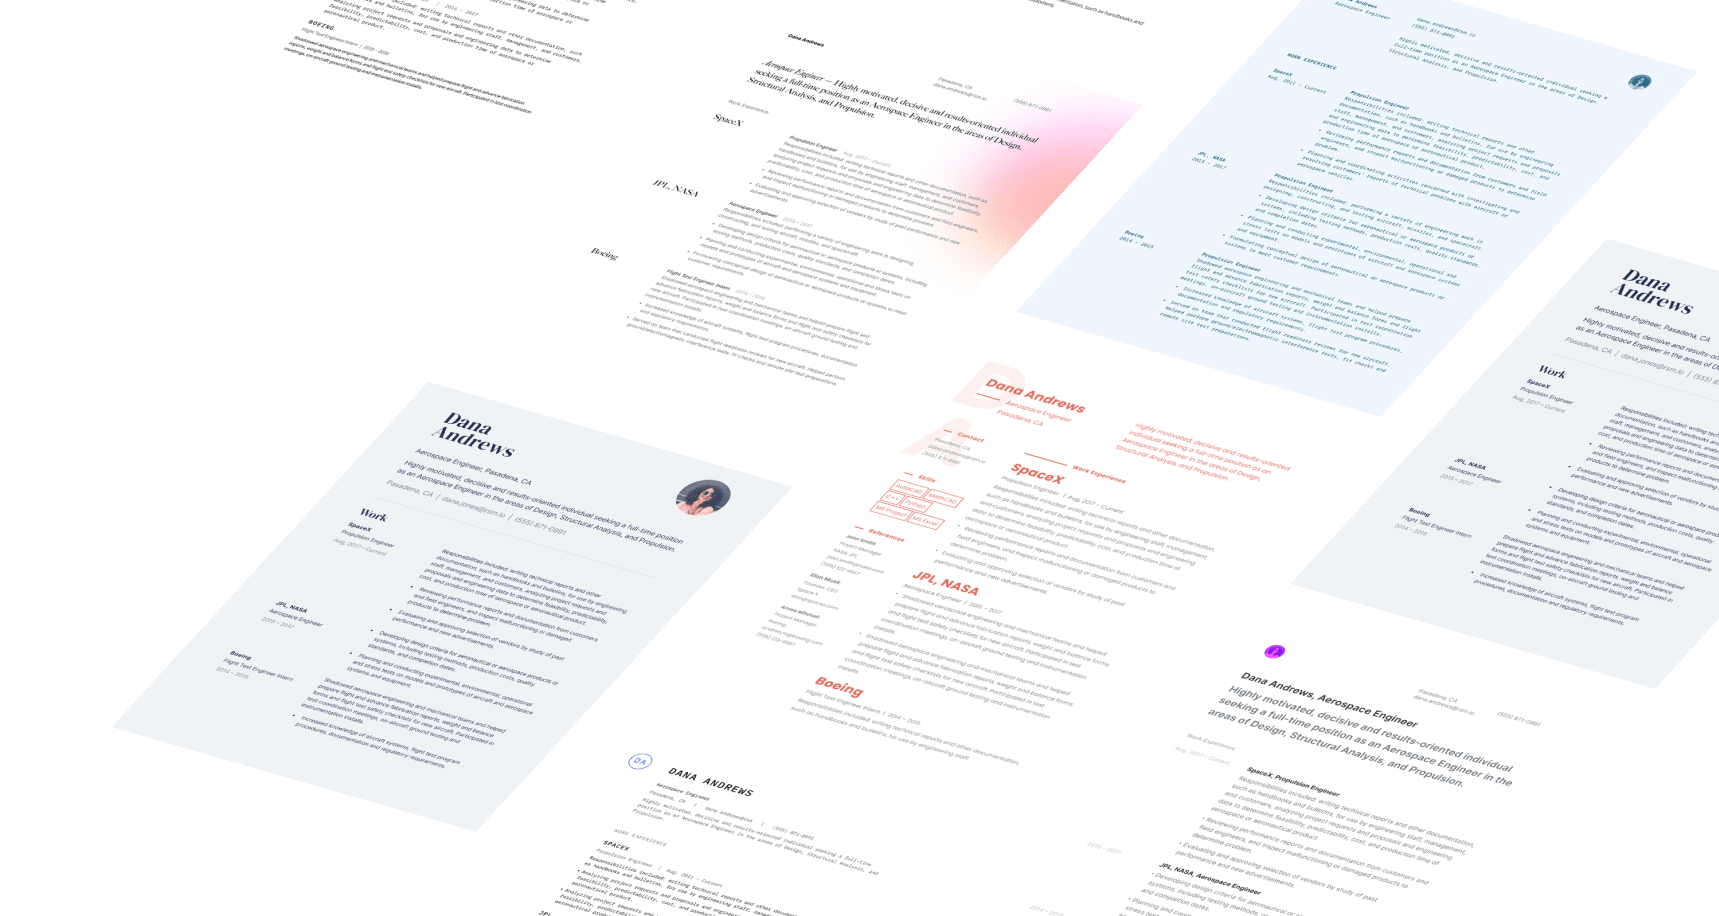 A grid of resumes created with Standard Resume